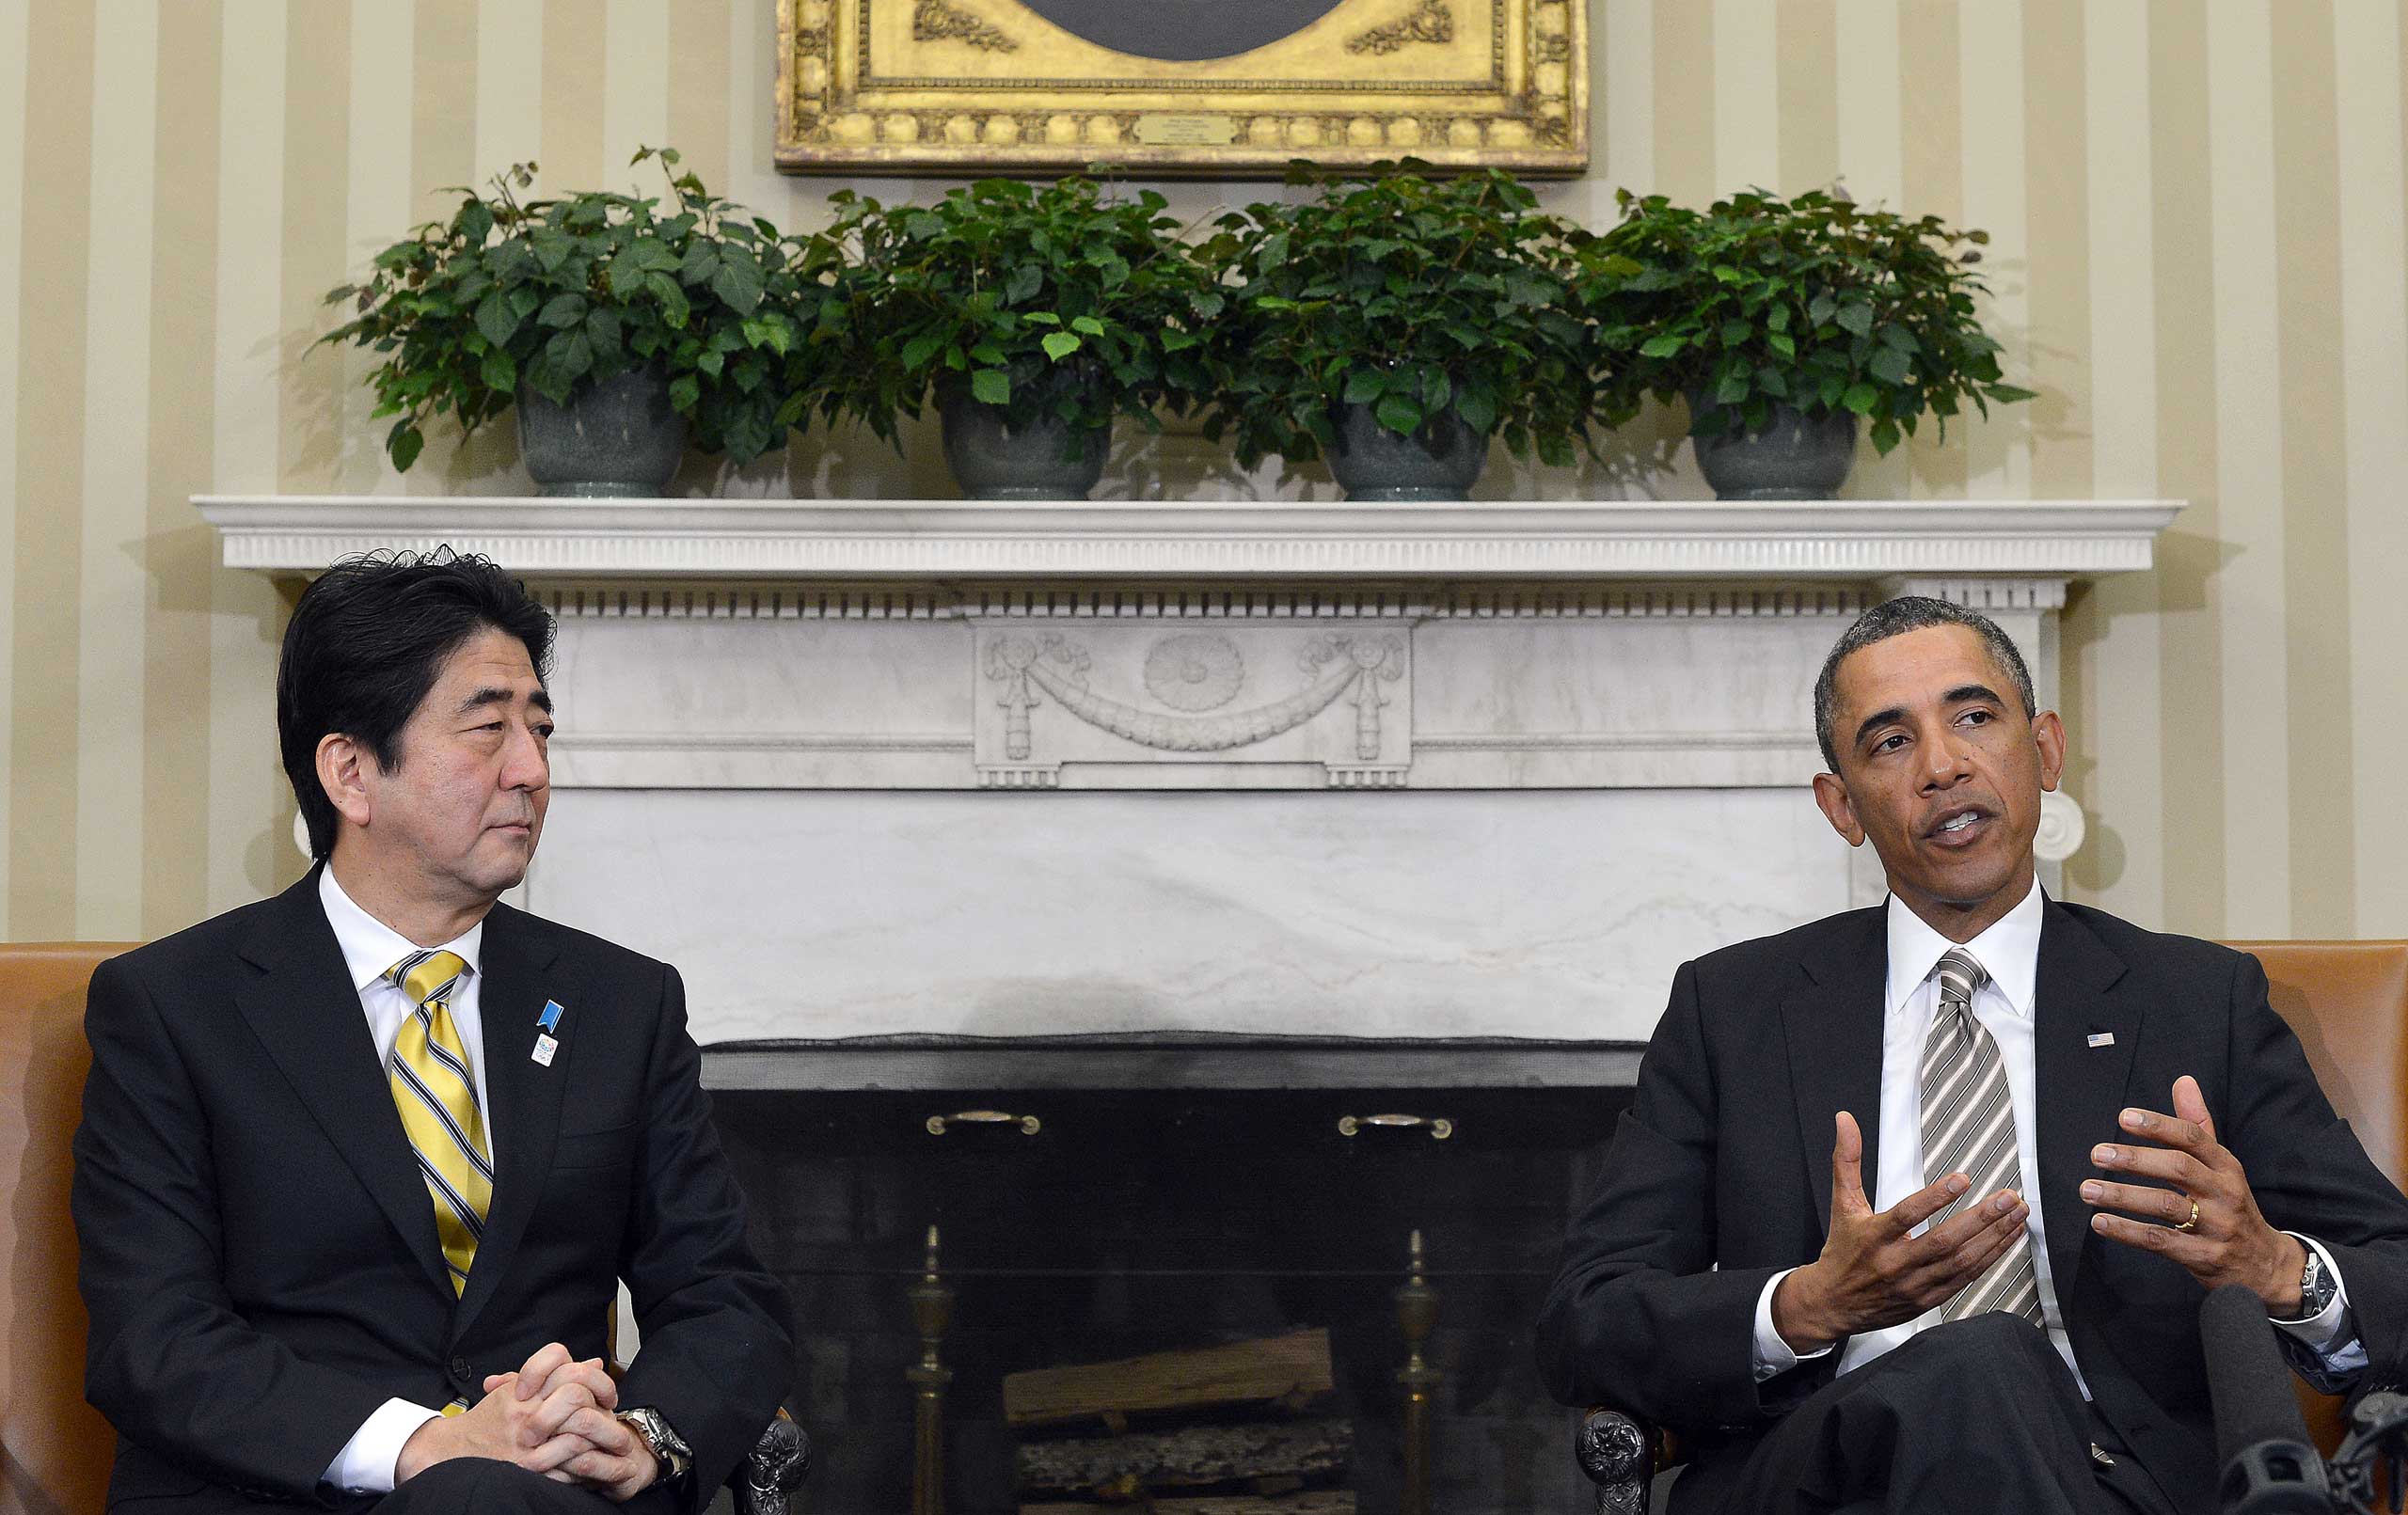 US President Barack Obama speaks while Japan's new conservative Prime Minister Shinzo Abe listens, following their bilateral meeting in the Oval Office at the White House in Washington, DC, on Feb. 22, 2013.